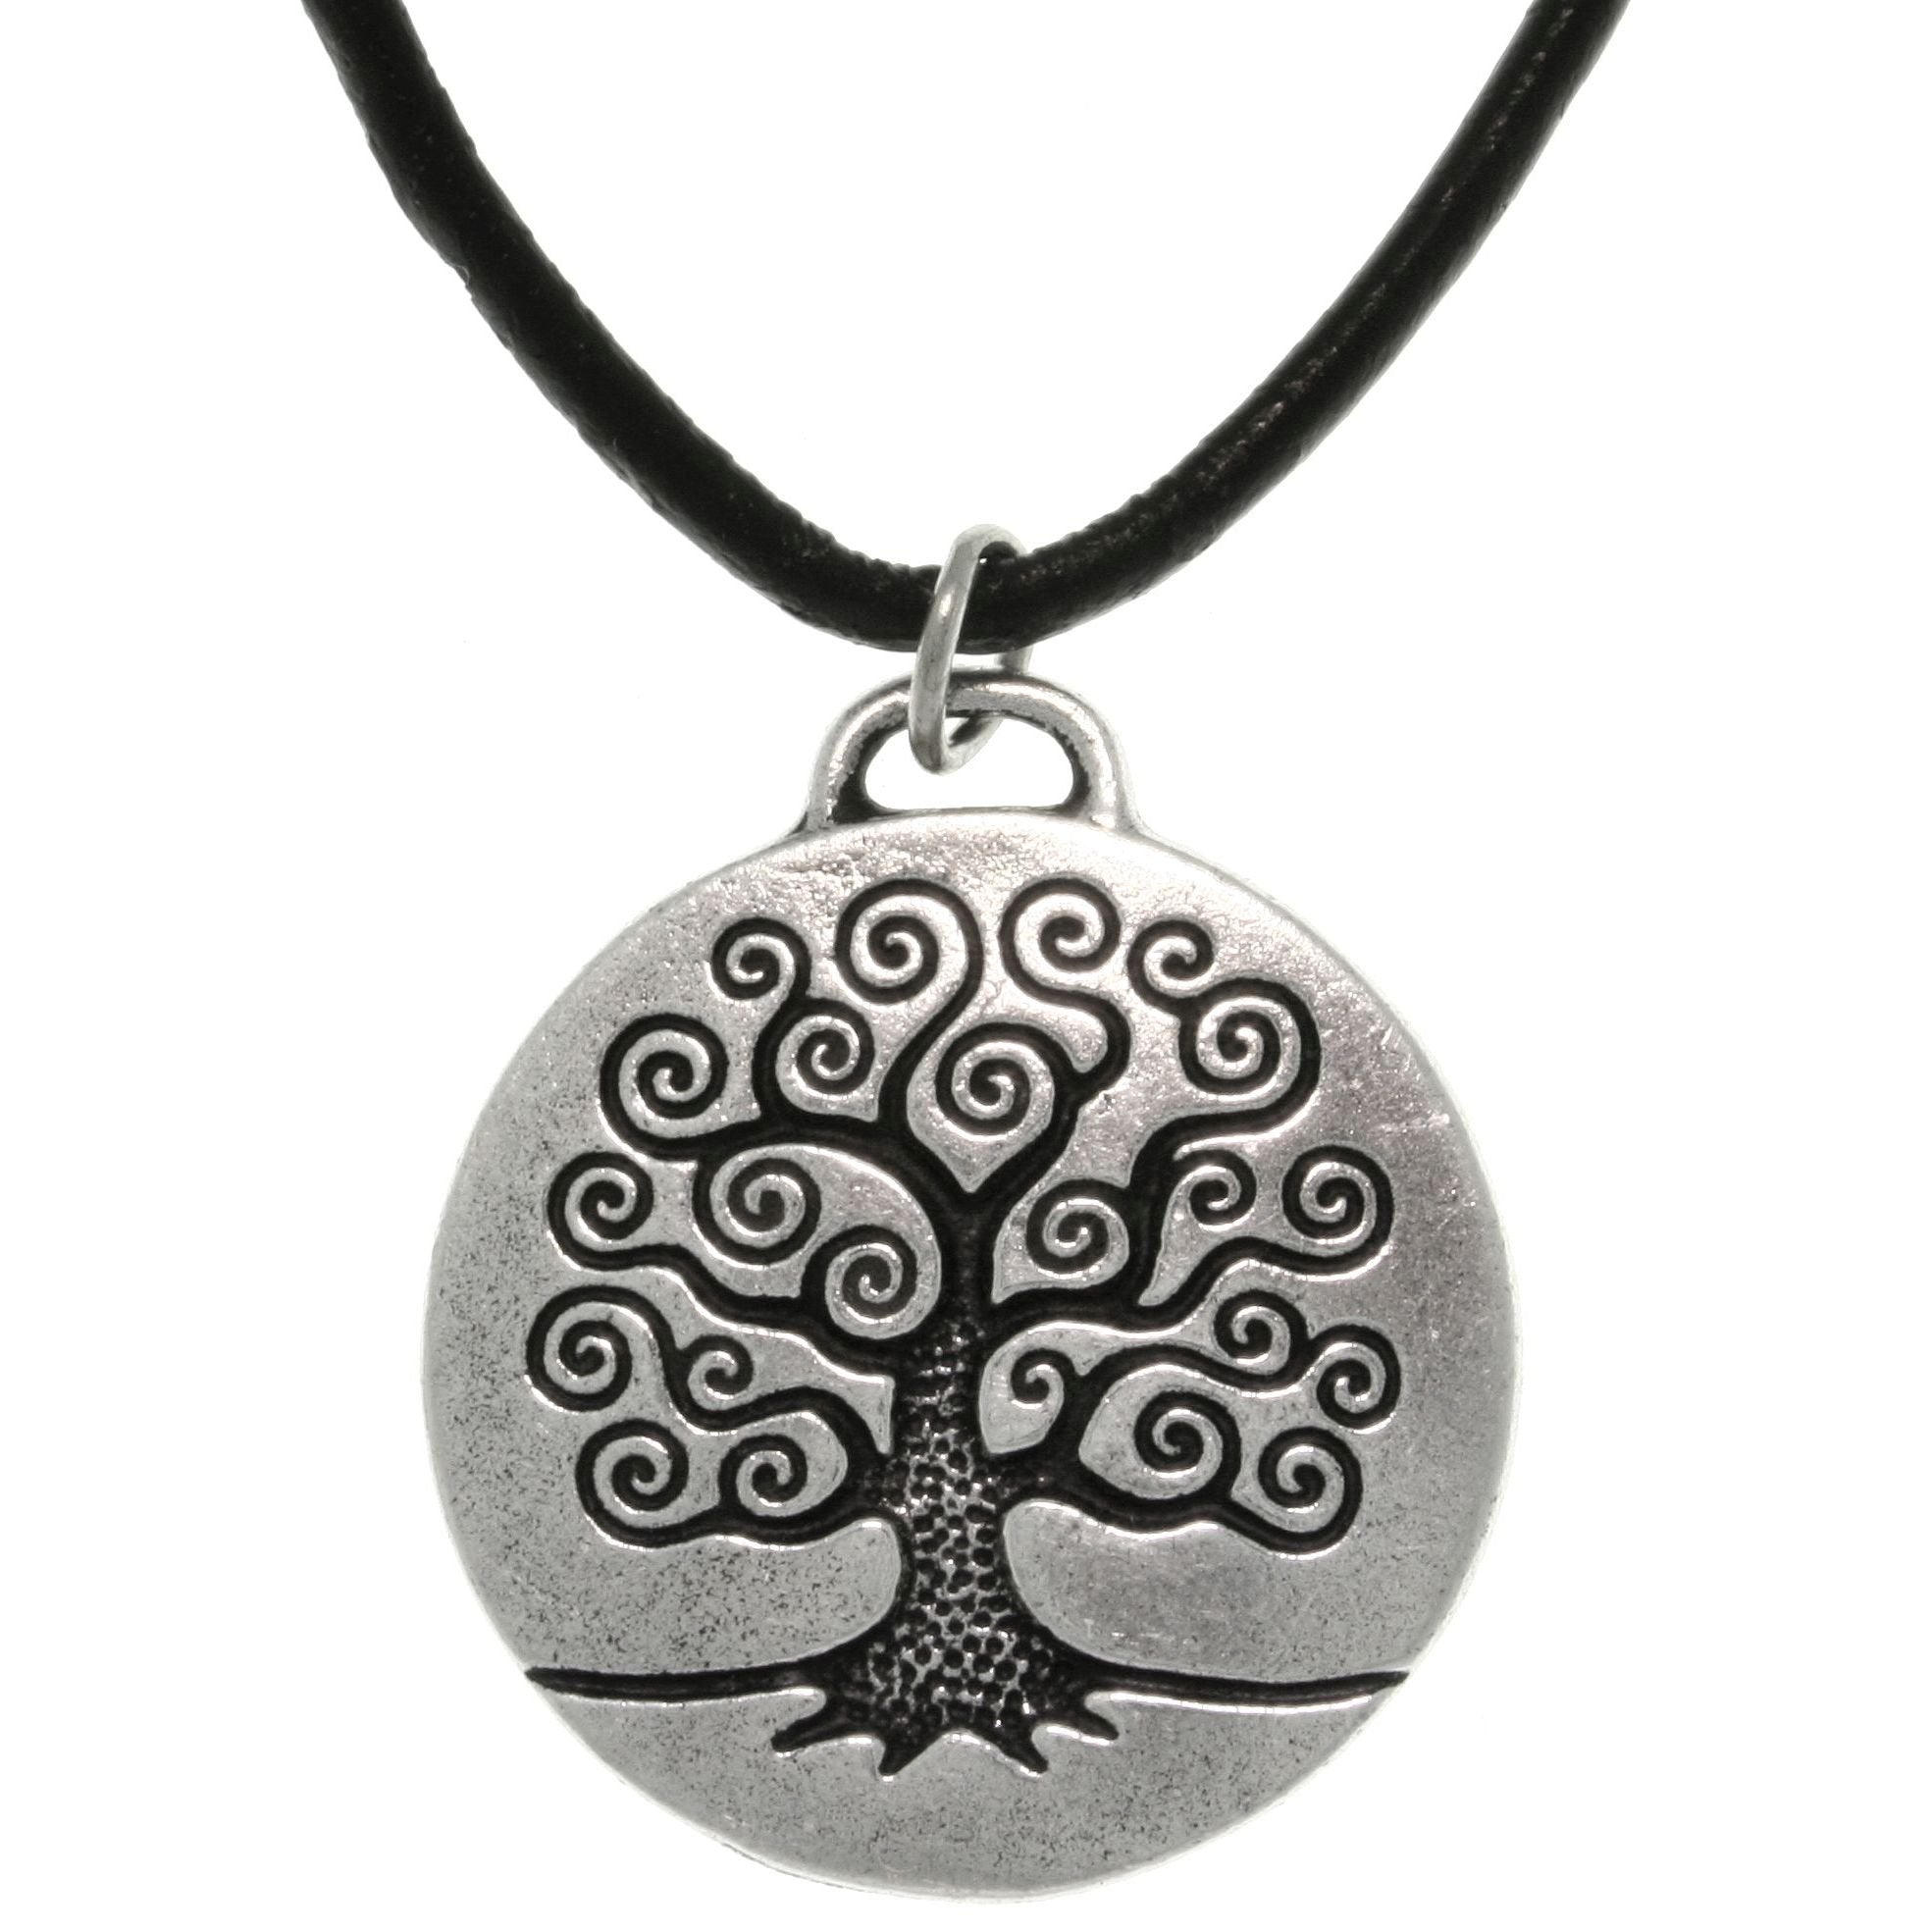 Jewelry Trends Pewter Unisex Celtic Tree of Life Pendant with 18 Inch Black Leather Cord Necklace